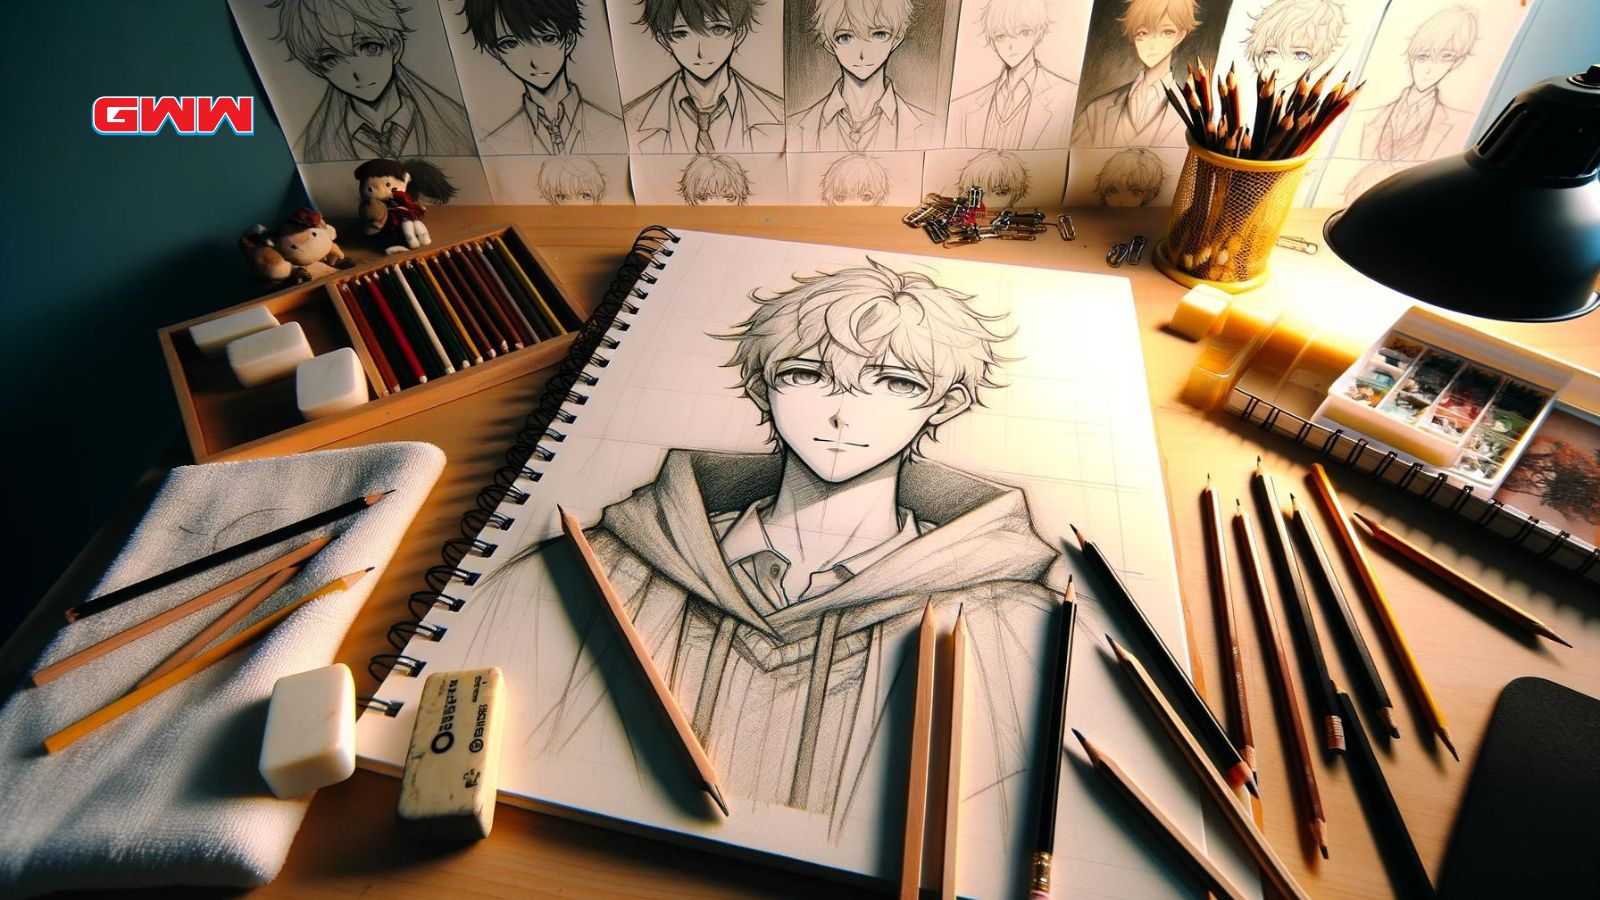 Drawing anime boy, desk with sketchbook, pencils, and character sketches